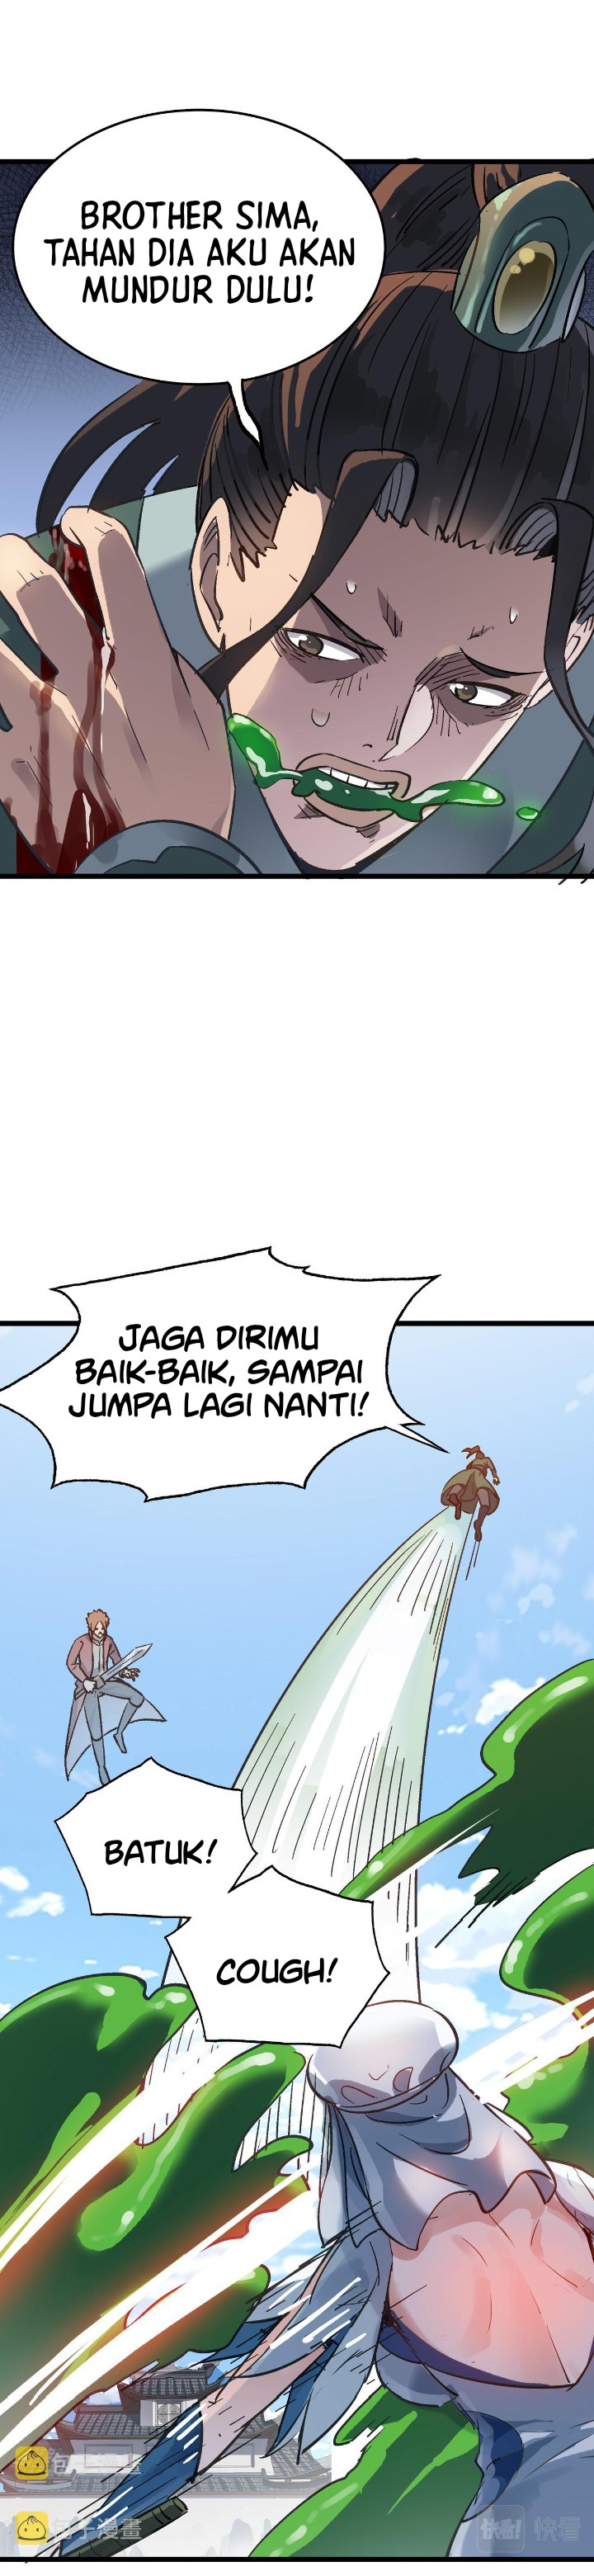 Dilarang COPAS - situs resmi www.mangacanblog.com - Komik building the strongest shaolin temple in another world 045 - chapter 45 46 Indonesia building the strongest shaolin temple in another world 045 - chapter 45 Terbaru 35|Baca Manga Komik Indonesia|Mangacan